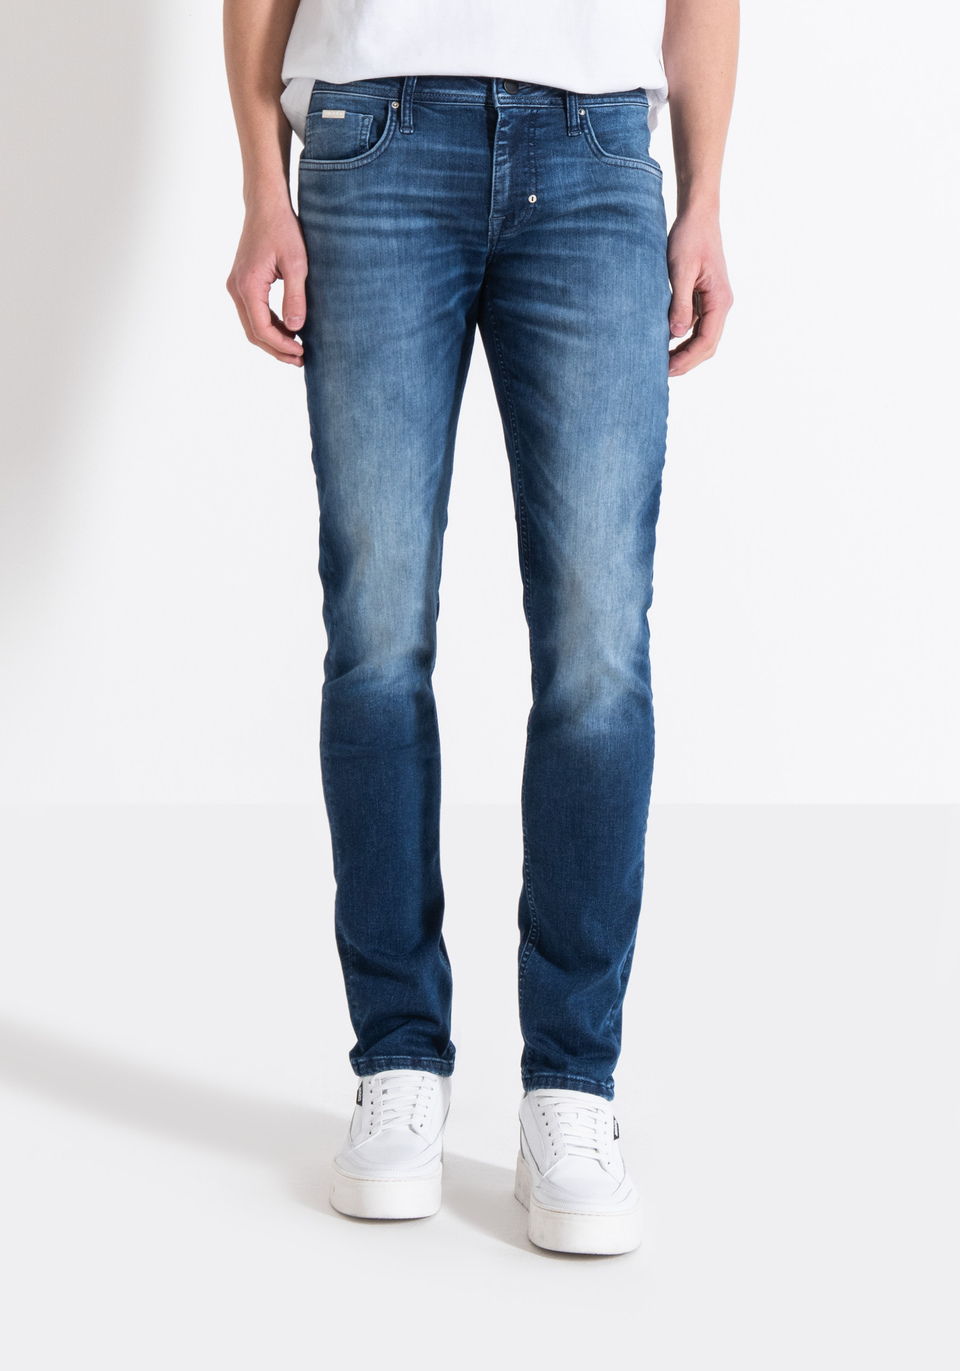 JEANS OZZY TAPERED FIT IN MID BLUE POWER STRETCH DENIM - Antony Morato Online Shop